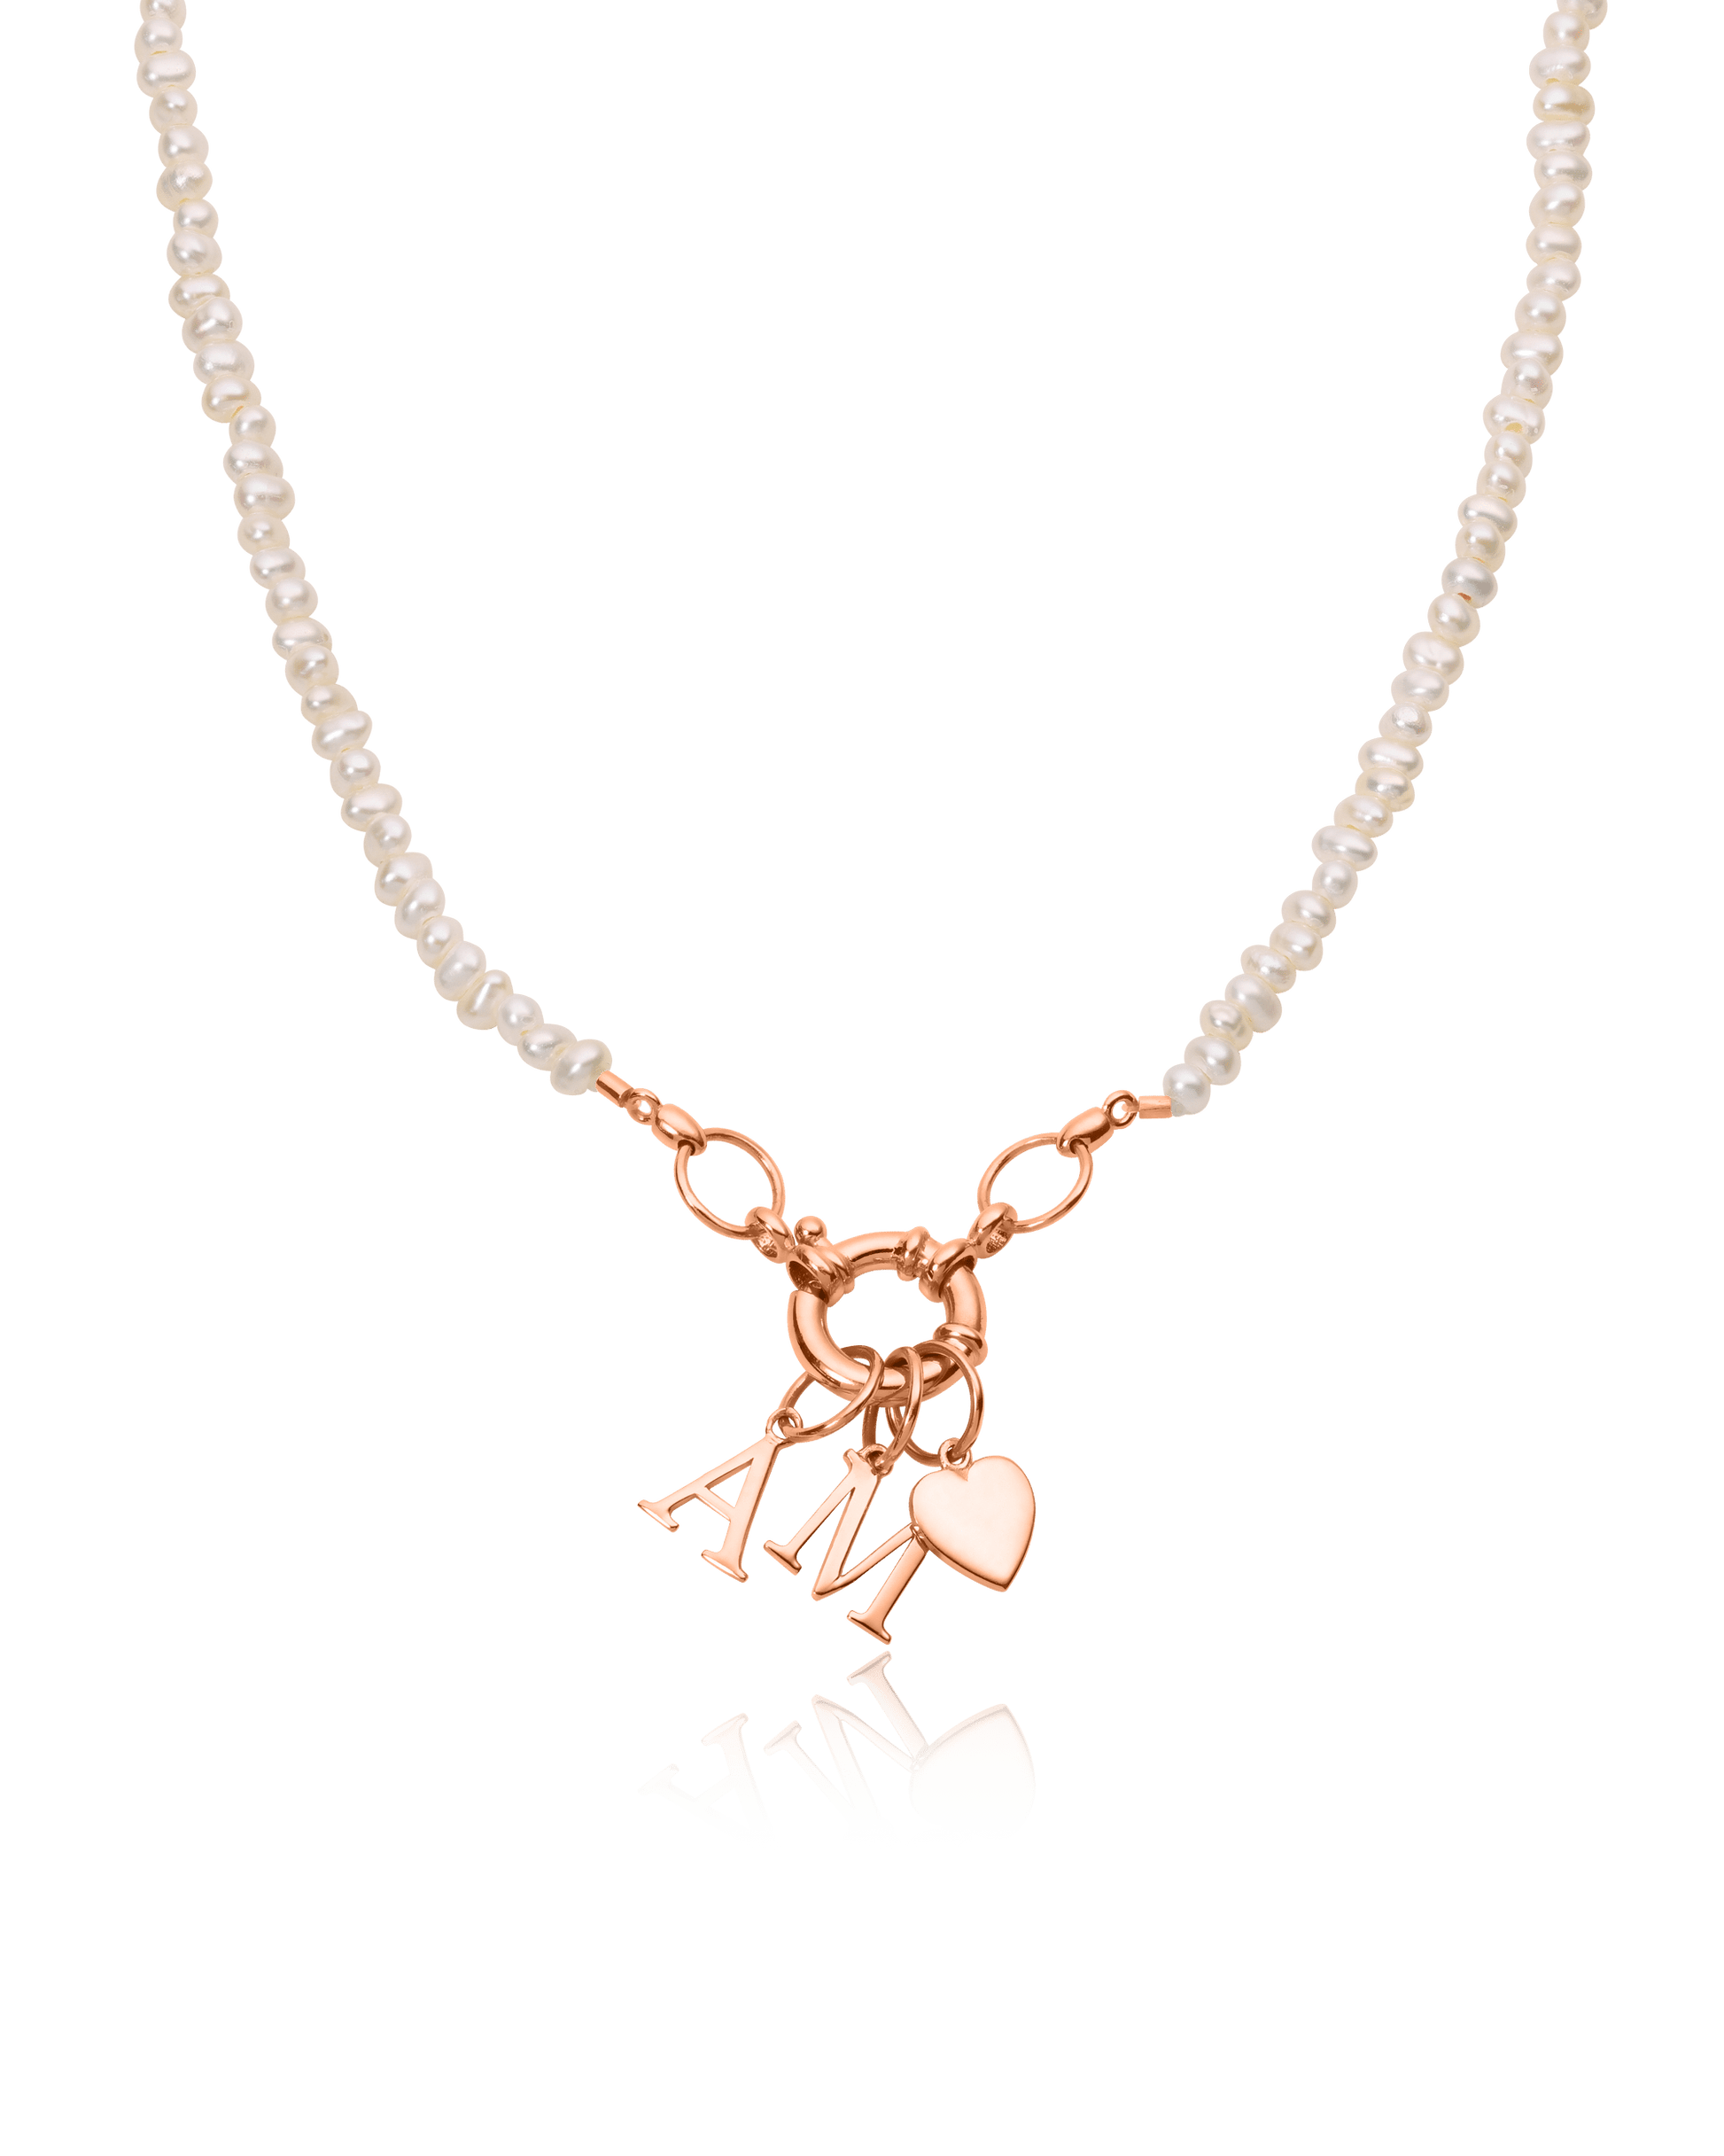 Green Jade Charm Lock Necklace - 18K Rose Vermeil Necklaces magal-dev Pearl (OUT OF STOCK) 1 Charm 16"